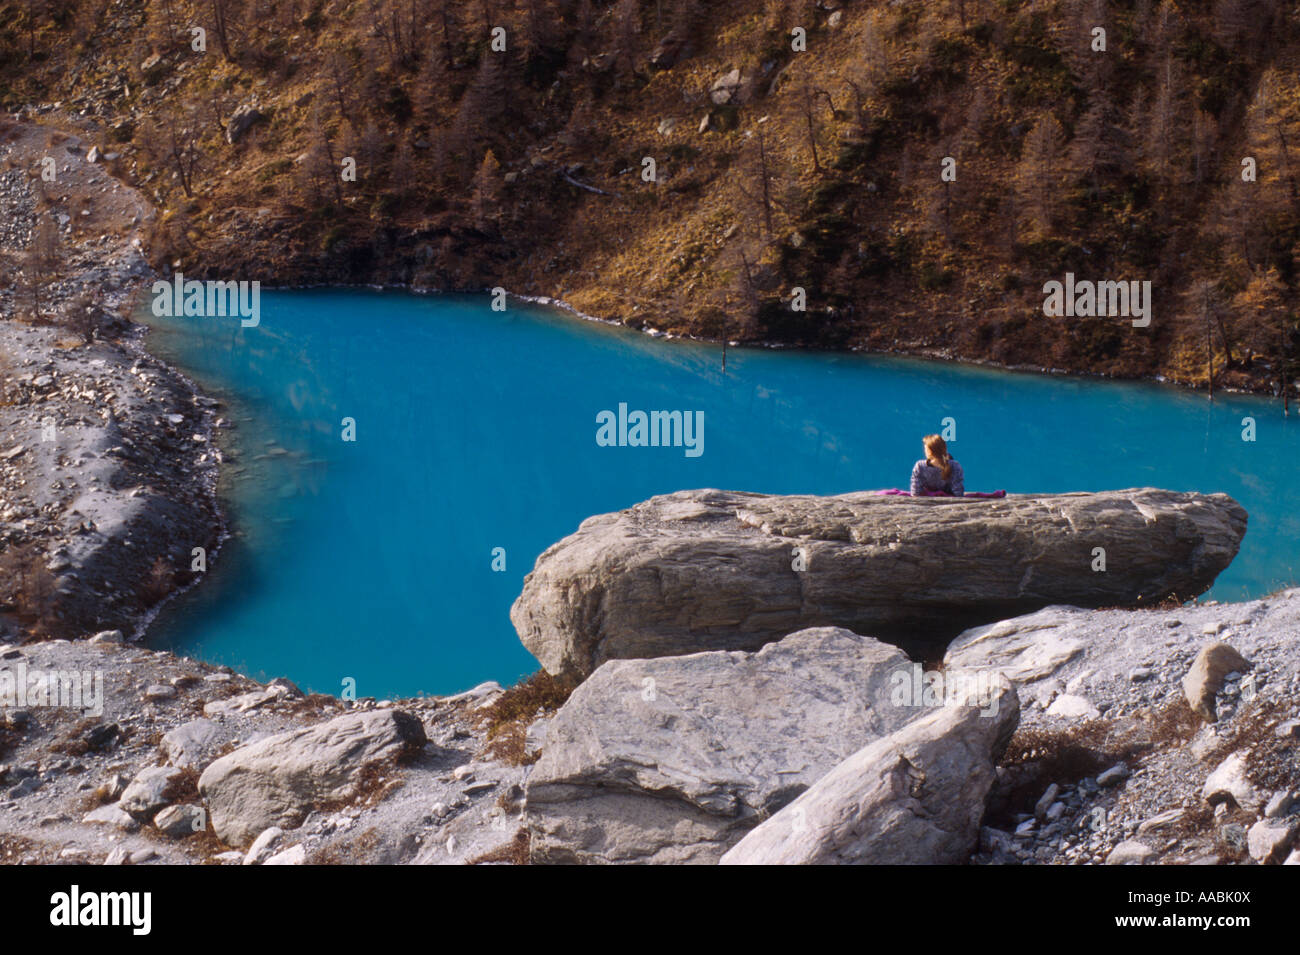 A tourist standing in front of the Blue Lake Ayas Valley Italy Stock Photo